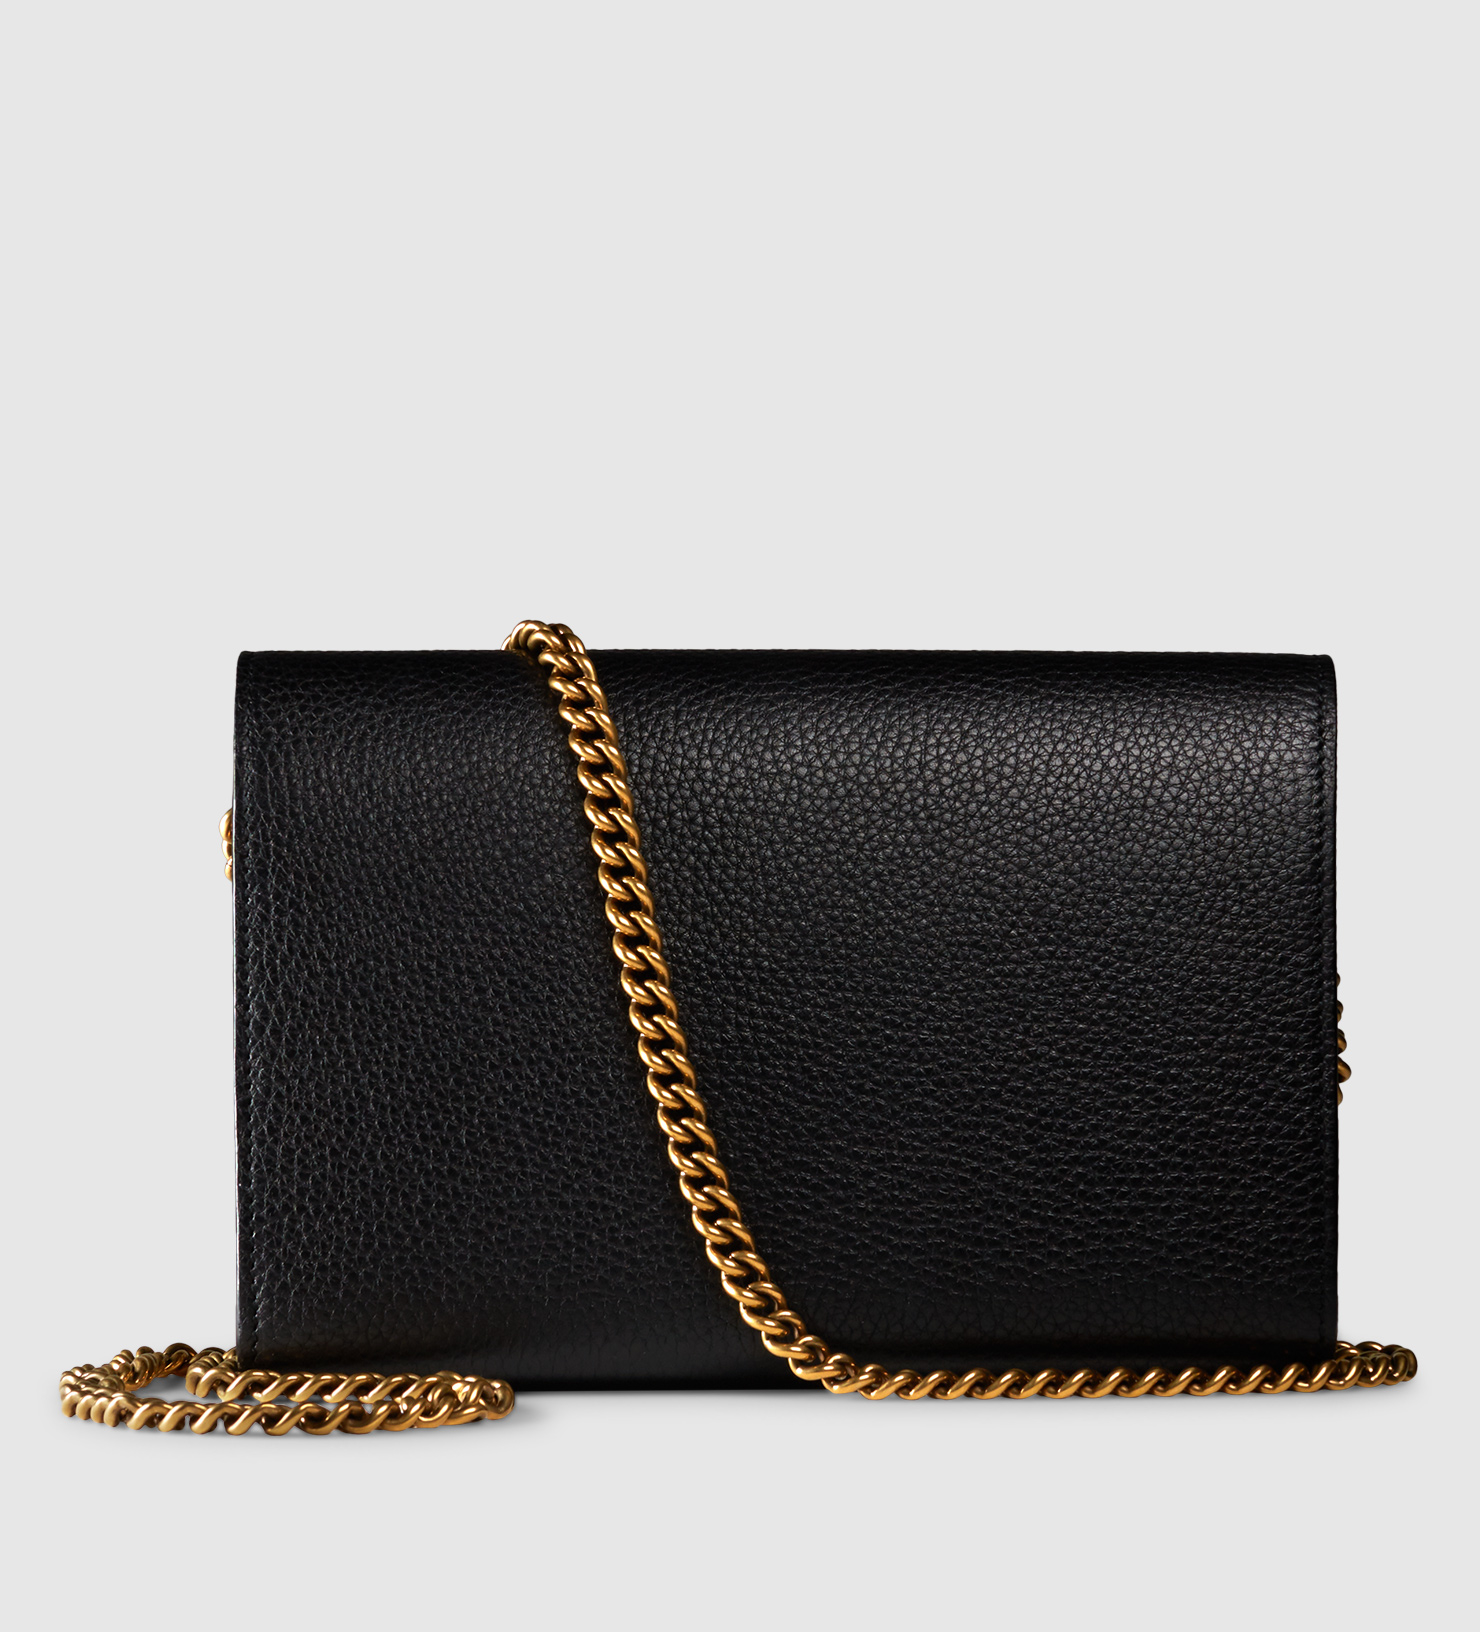 Gucci Gg Marmont Leather Chain Wallet in Black - Lyst